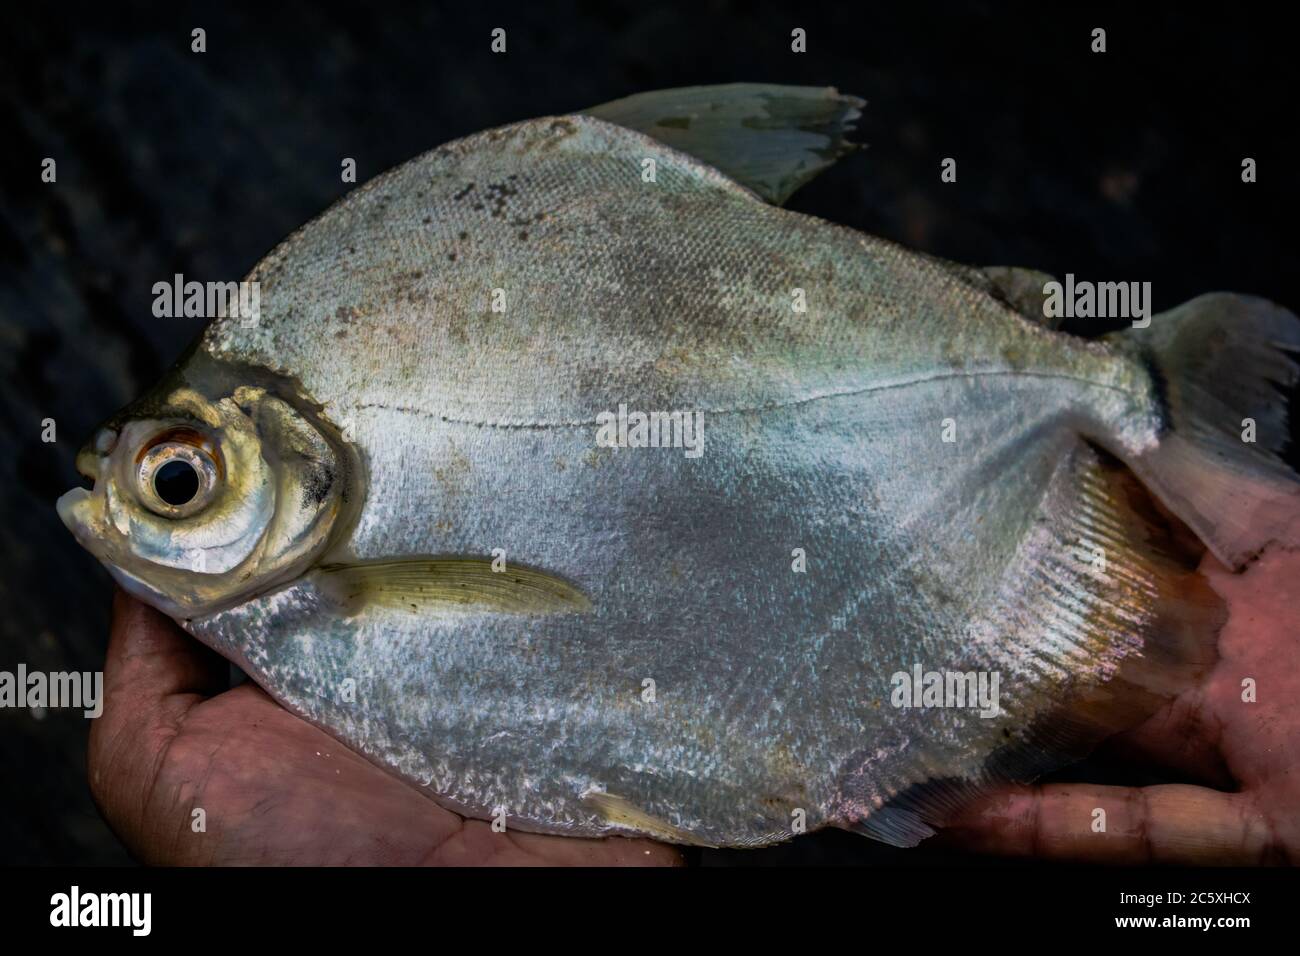 Mylossoma duriventre, a fish from the orinoco Basin and Amazon basin taken by fiherman with a hook. Stock Photo